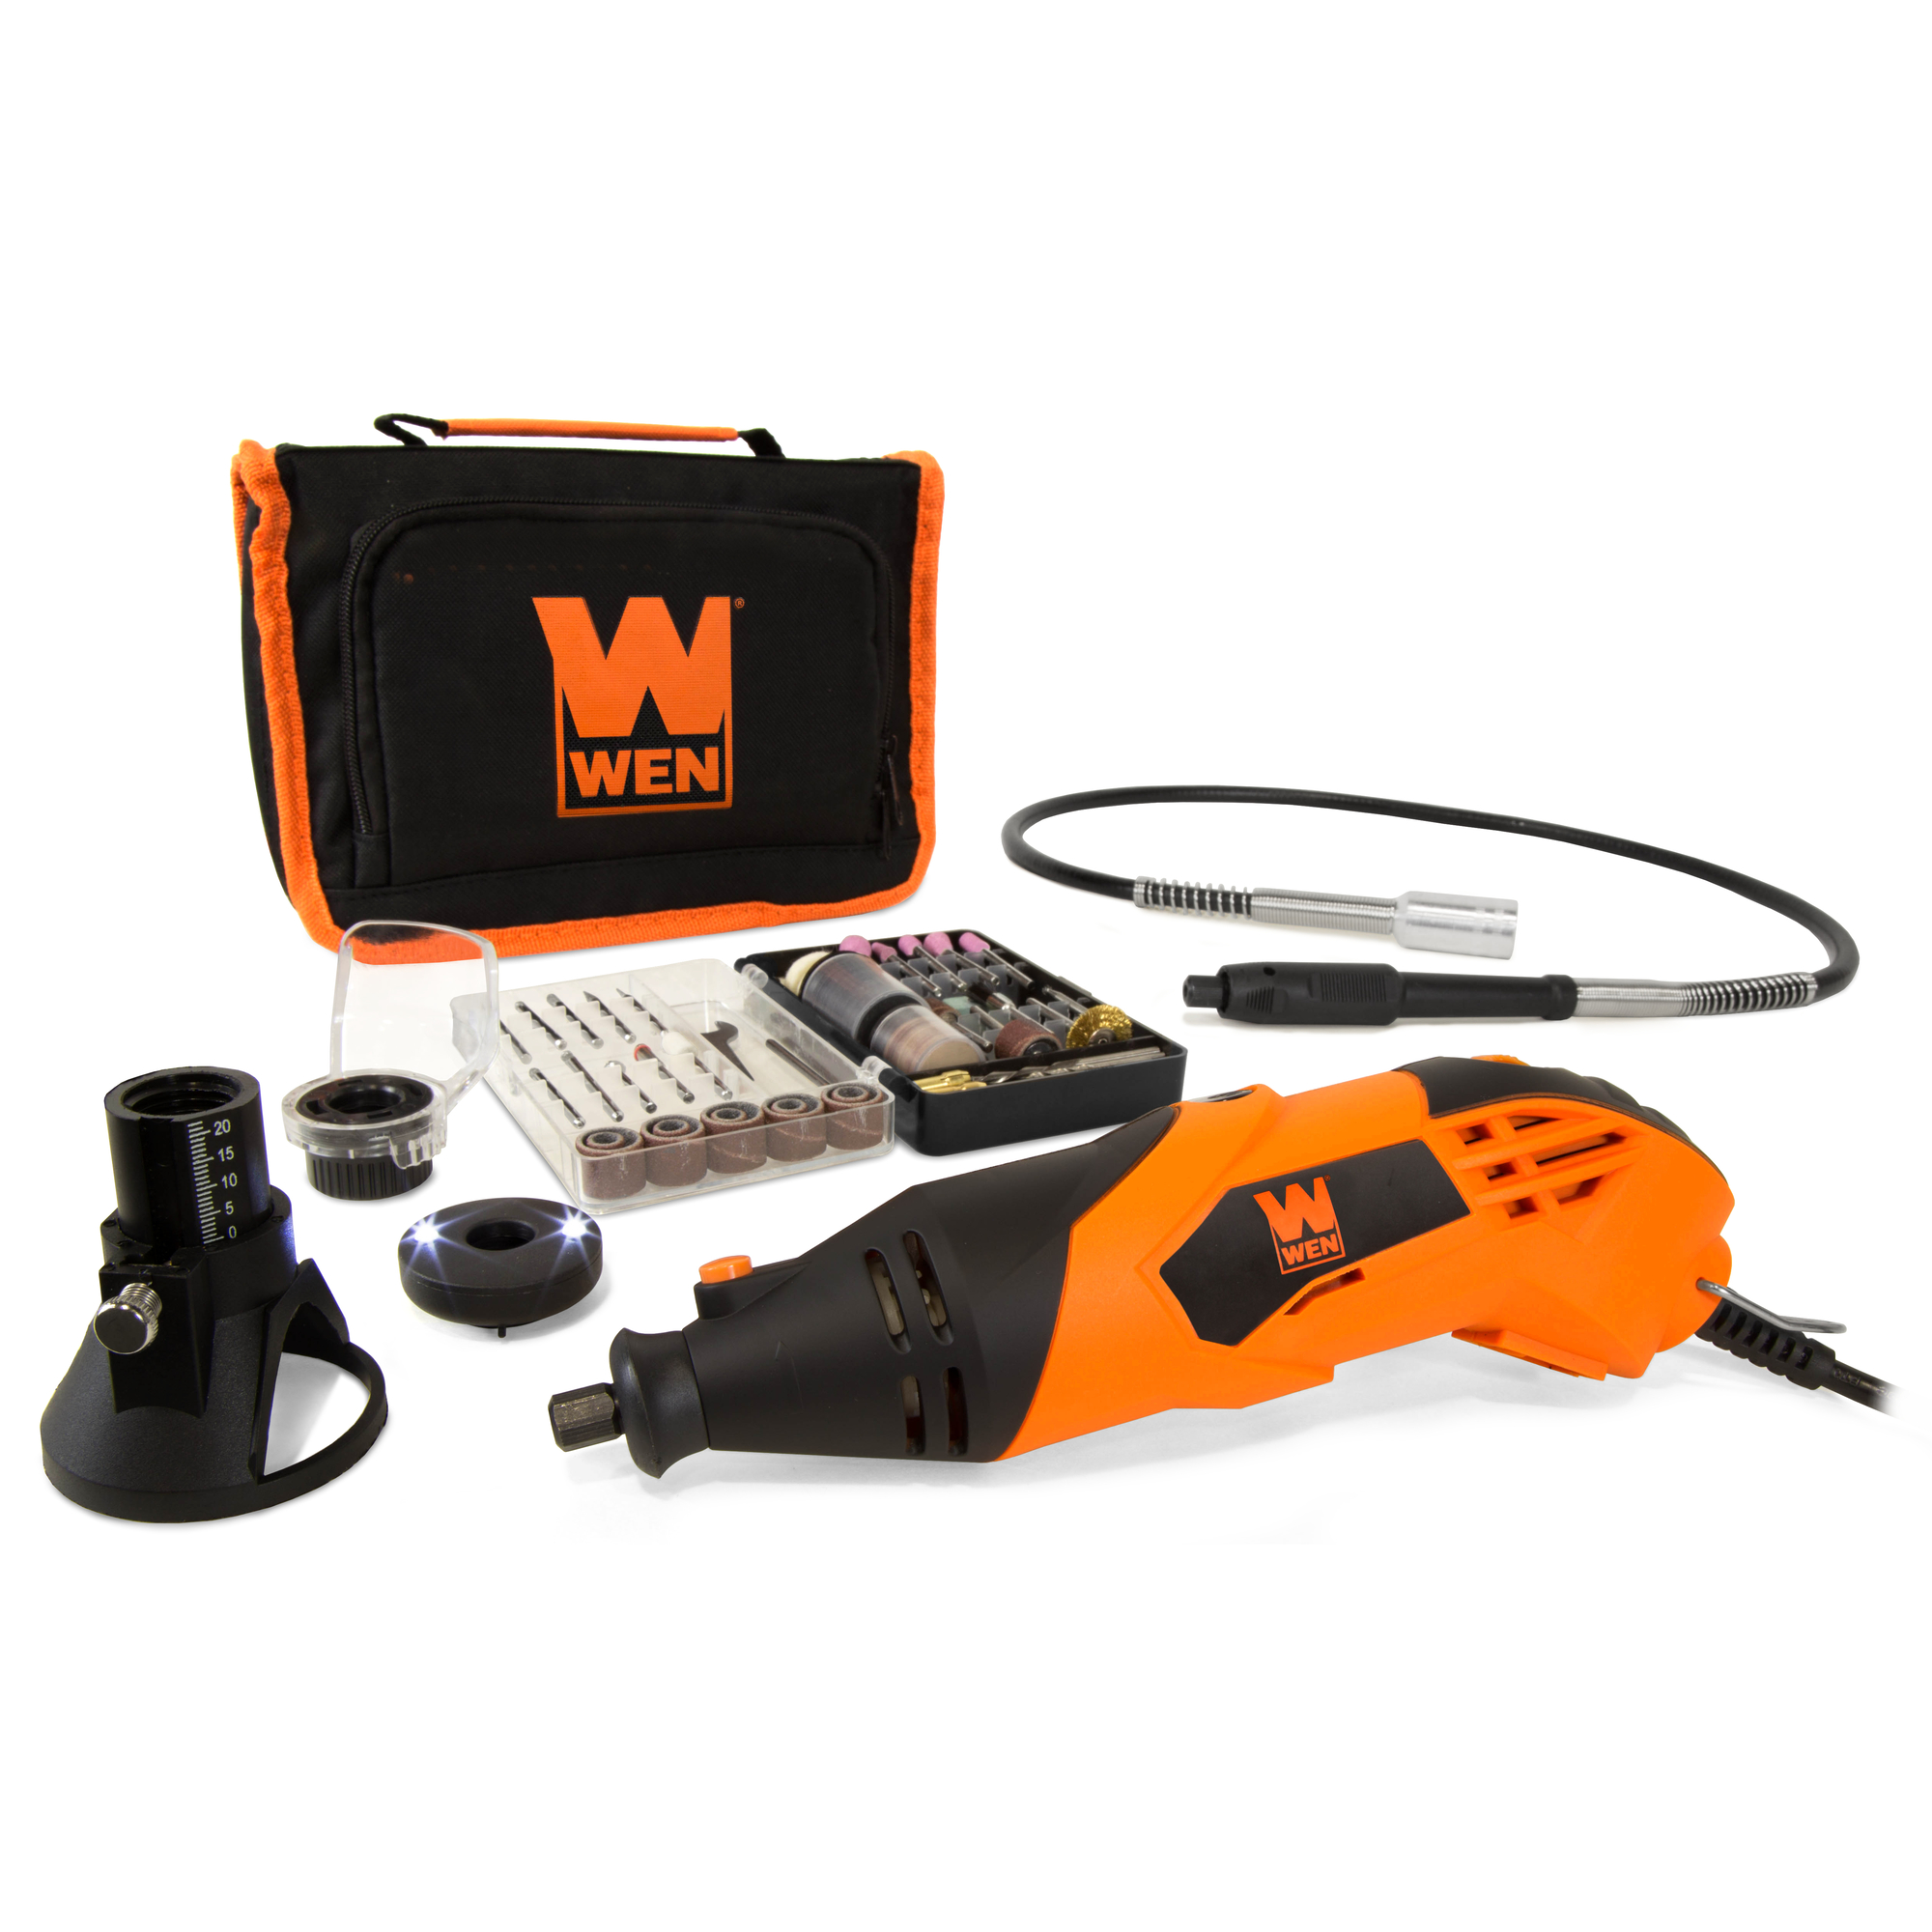 WEN, 1.4-A Rotary Tool kit w/ 100+ pcs + Cutting guide, Max. Speed 35000 rpm, Amps 1.4 Volts 120 Model 23114